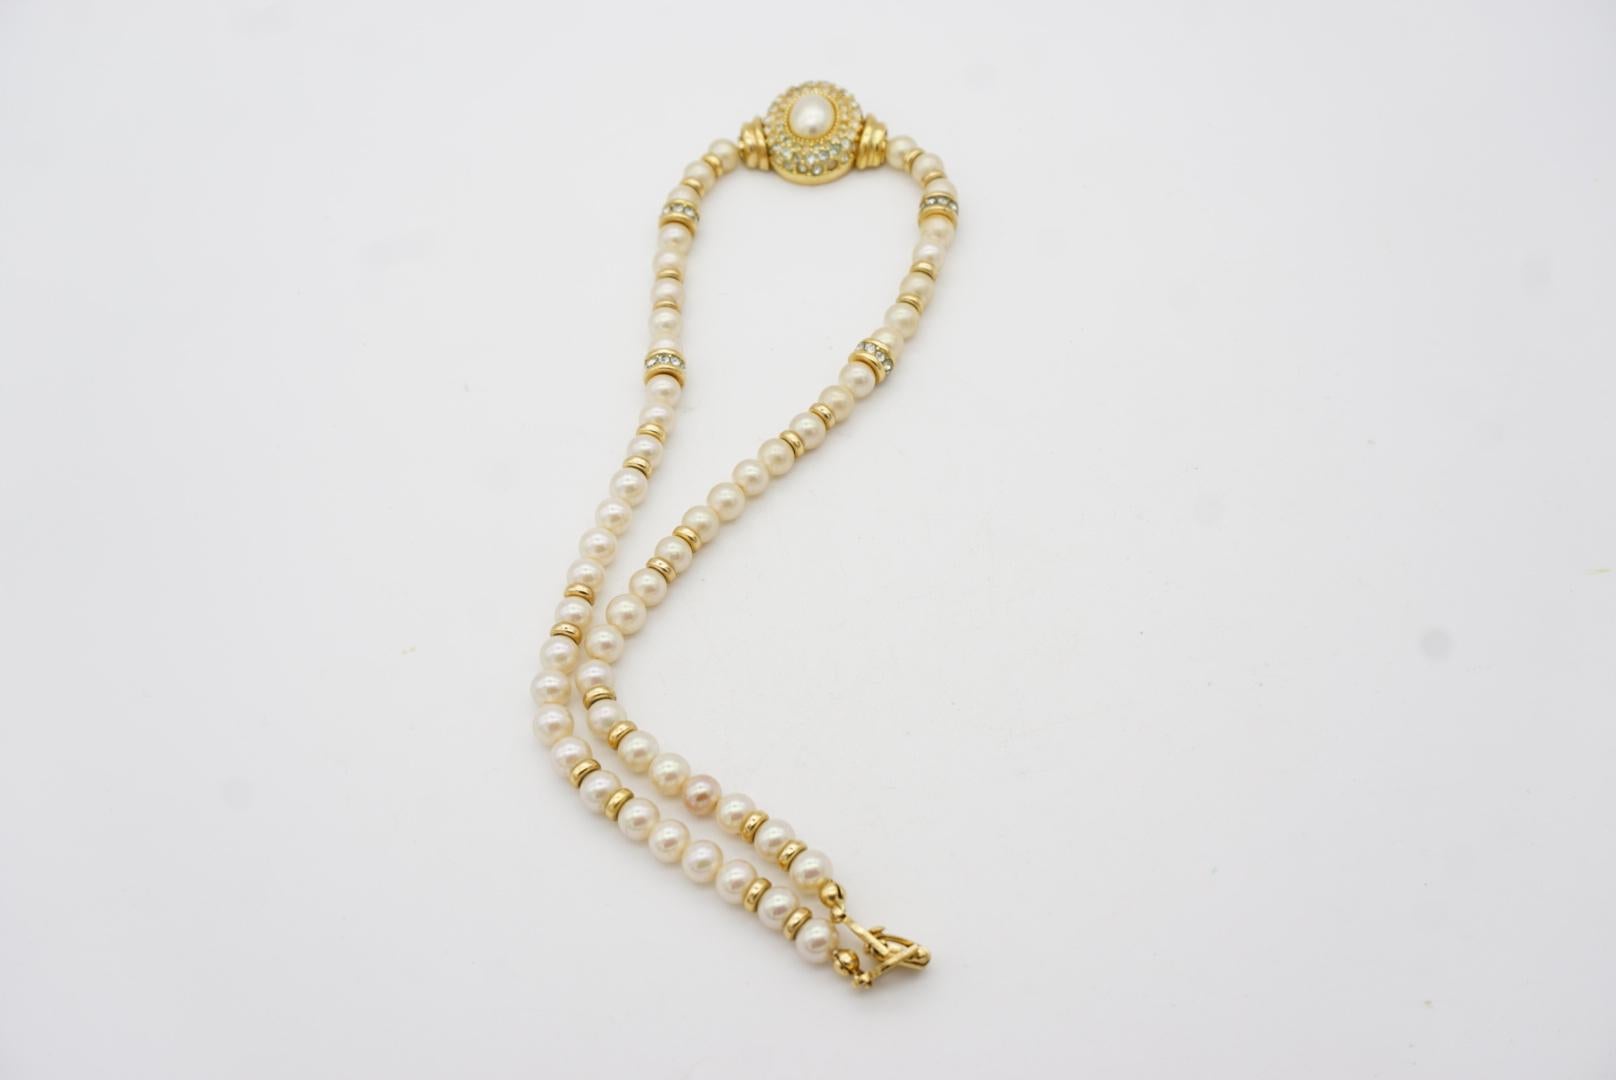 Christian Dior Vintage 1980s White Round Oval Pearl Crystals Pendant Necklace For Sale 9